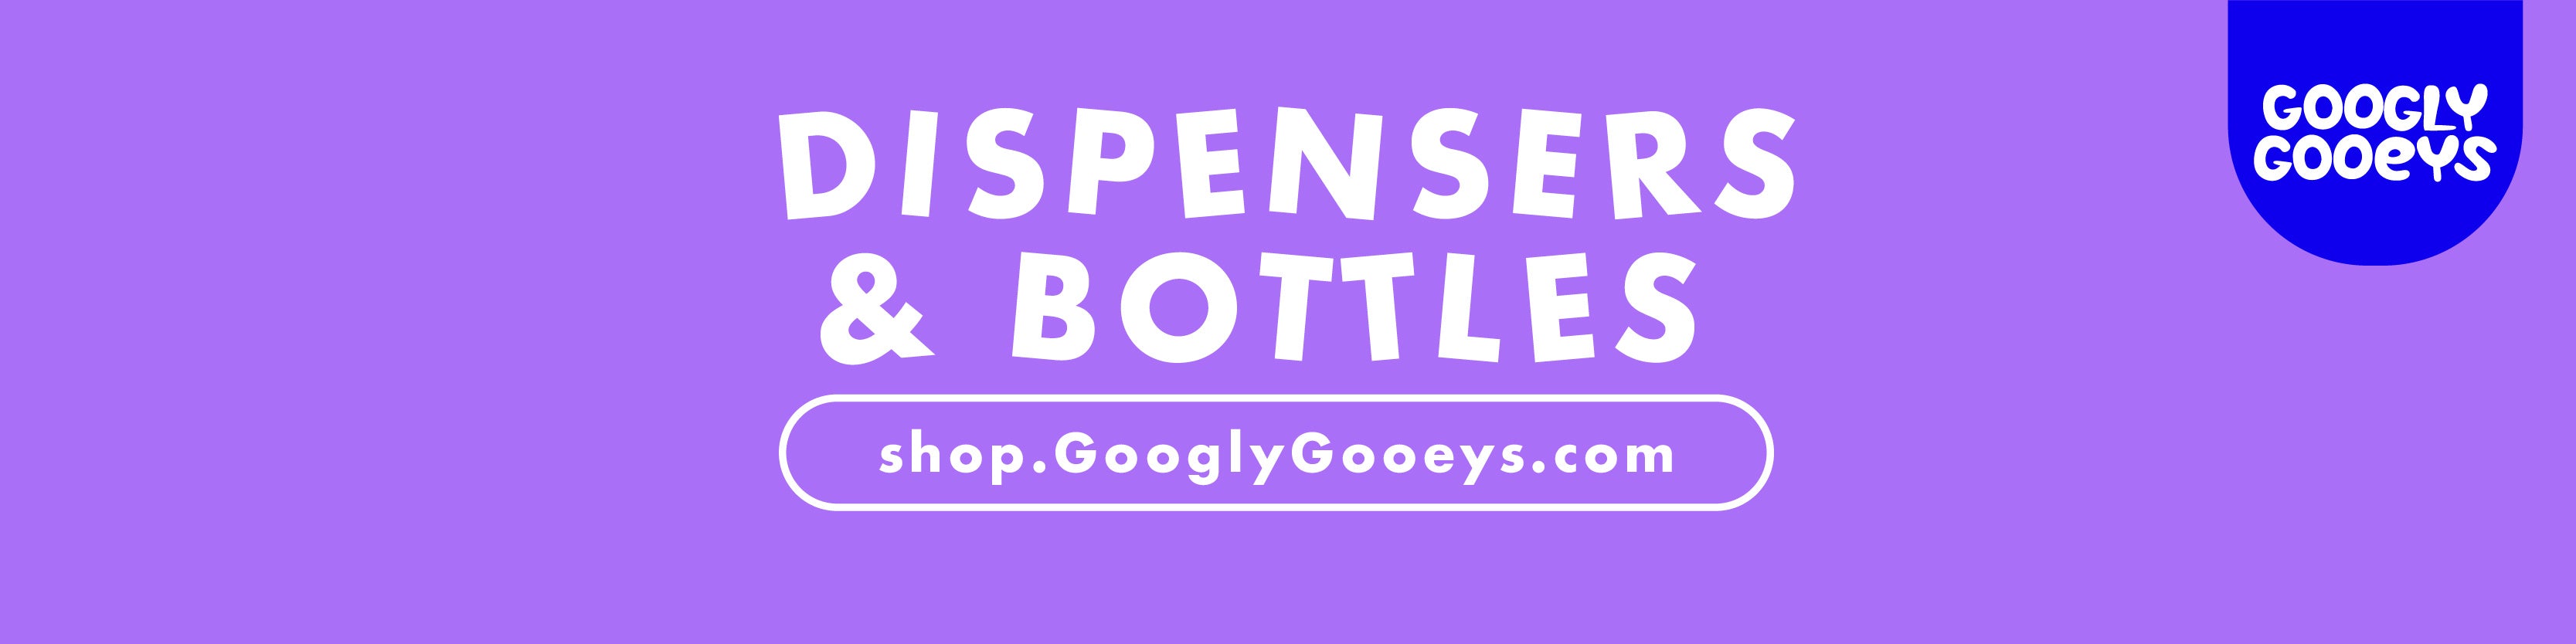 Dispensers and Bottles